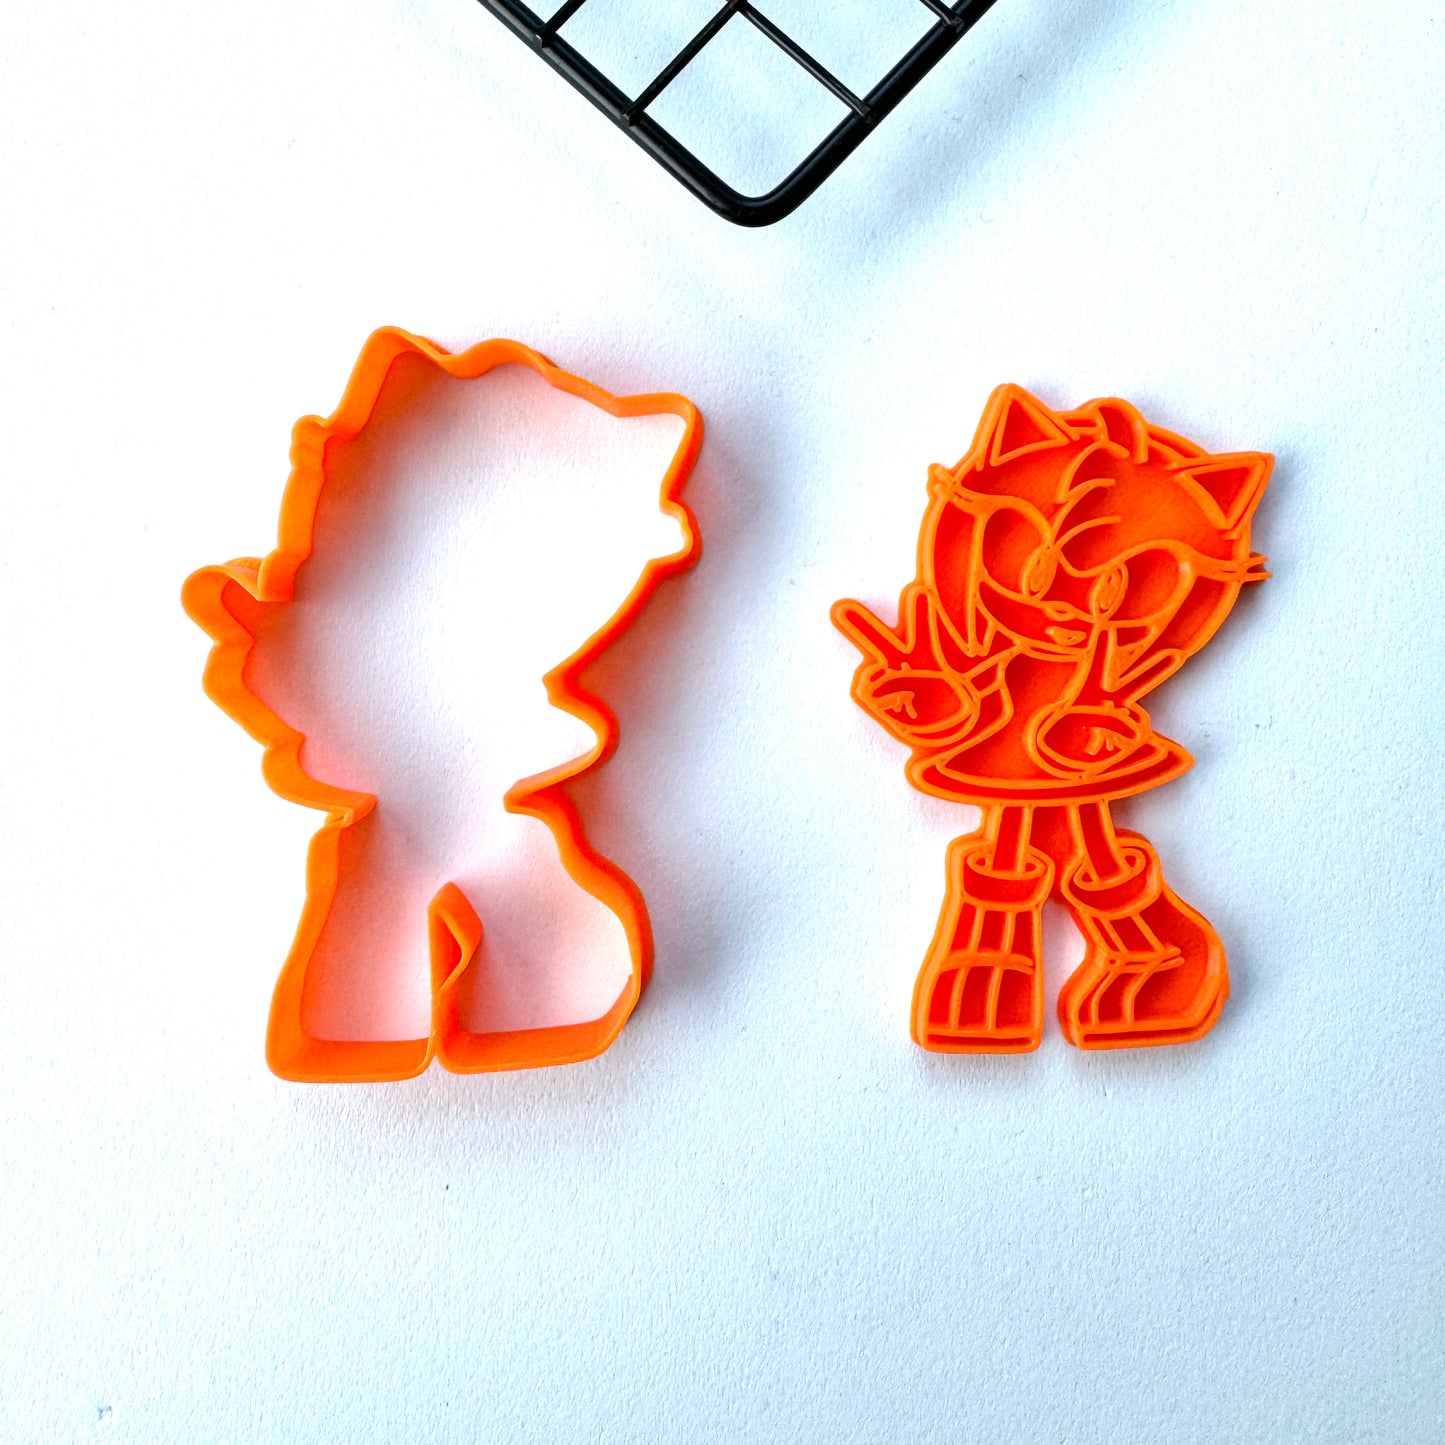 Amy rose 2 - Sonic The Hedgehog-inspired cookie cutter + stamp